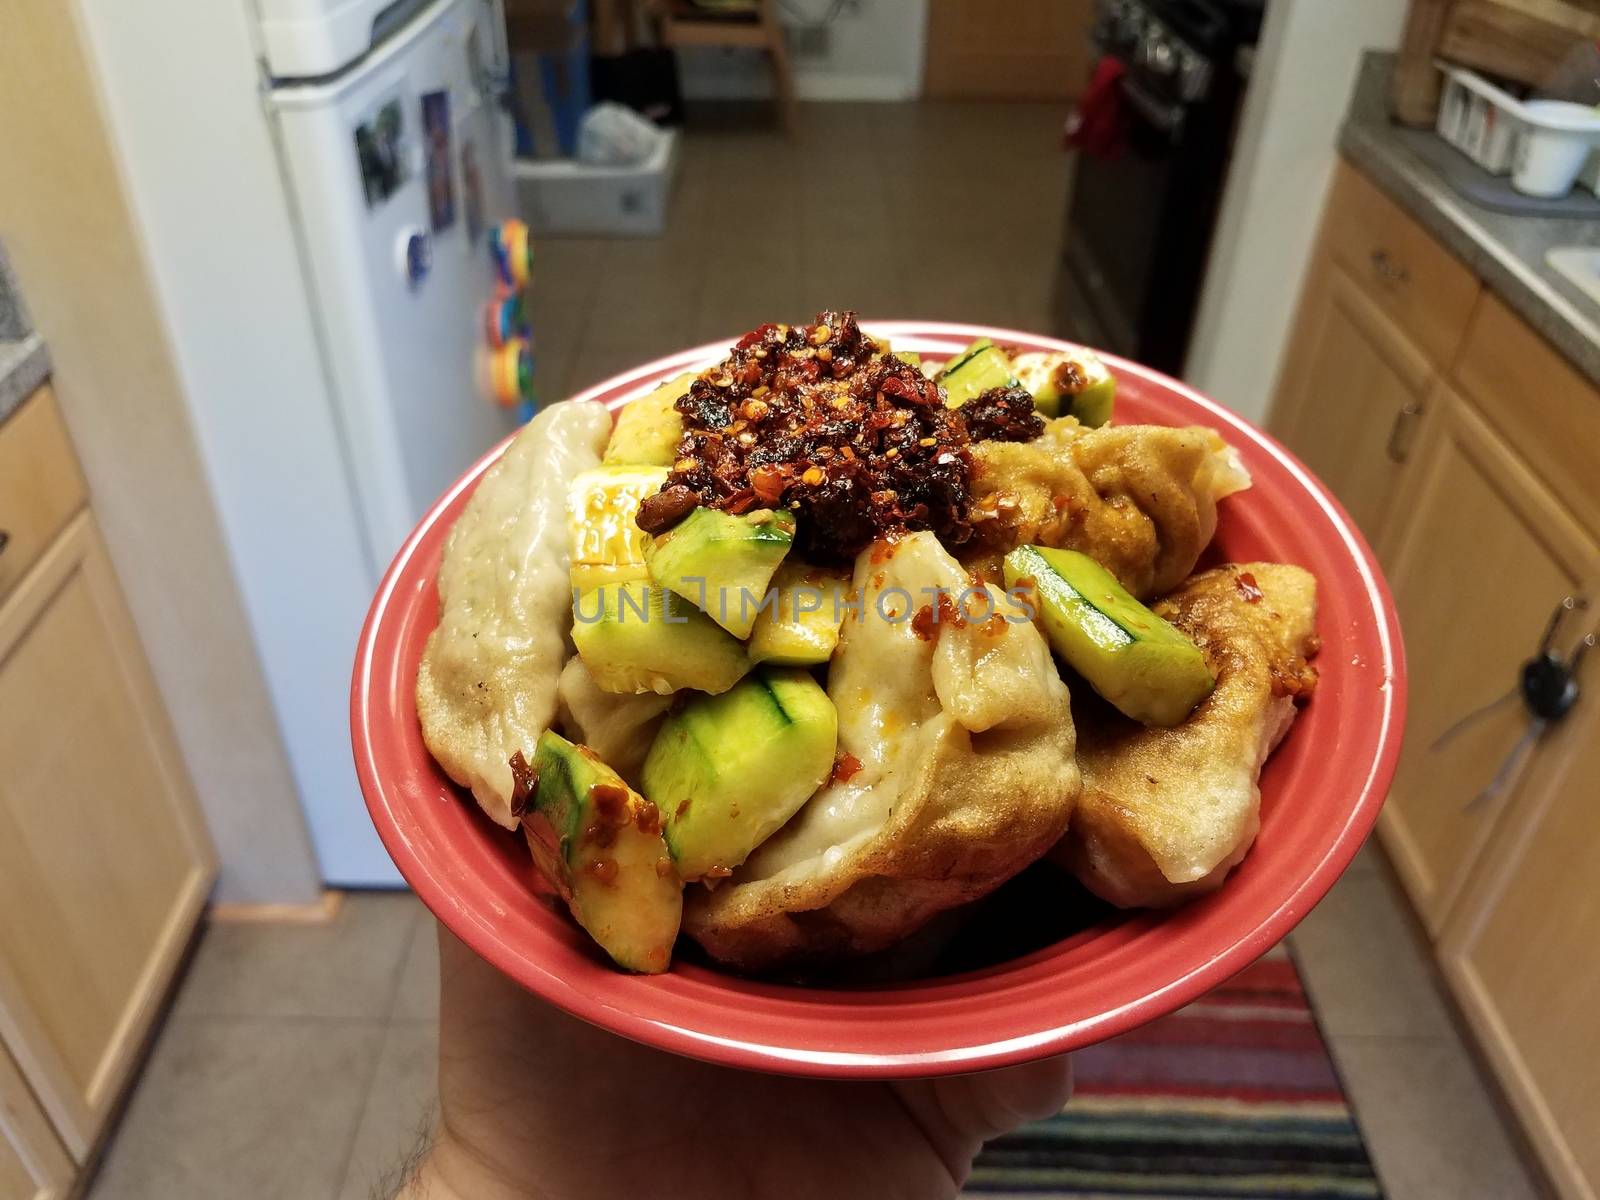 hand holding red bowl with Chinese dumplings and cucumber and chili sauce